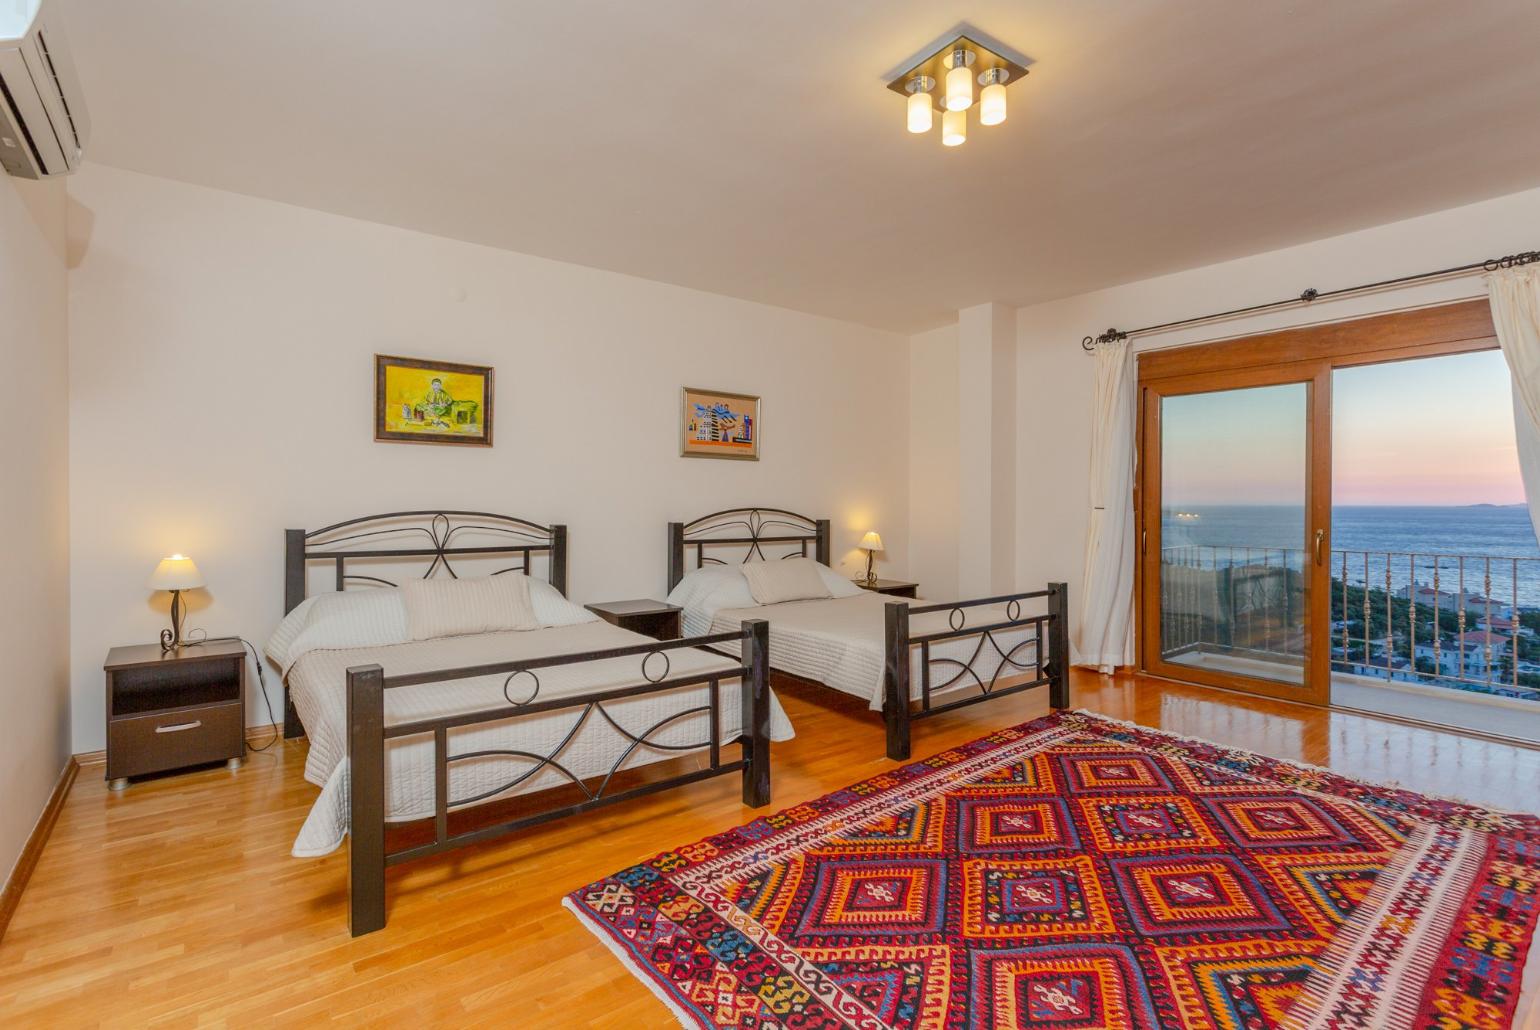 Twin bedroom with en suite bathroom, A/C, and panoramic sea views